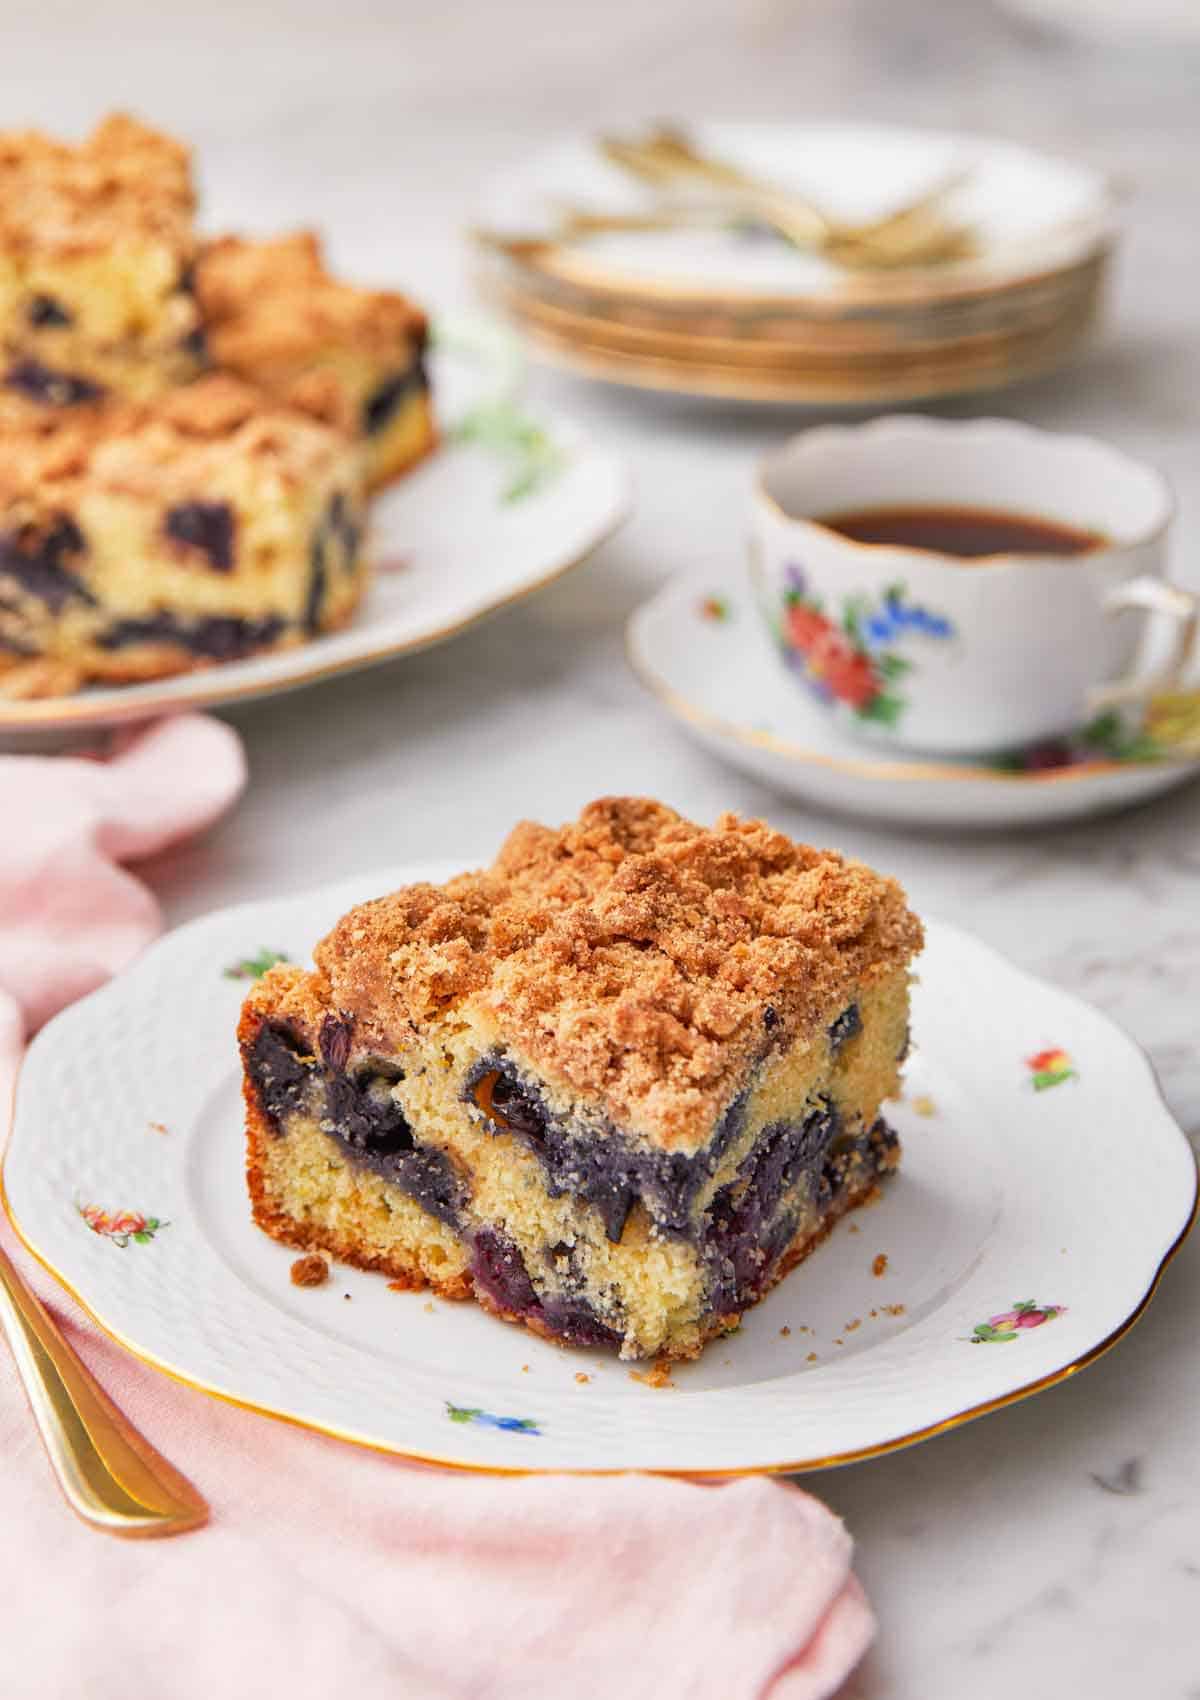 A square piece blueberry coffee cake on a plate in front of a cup of coffee.